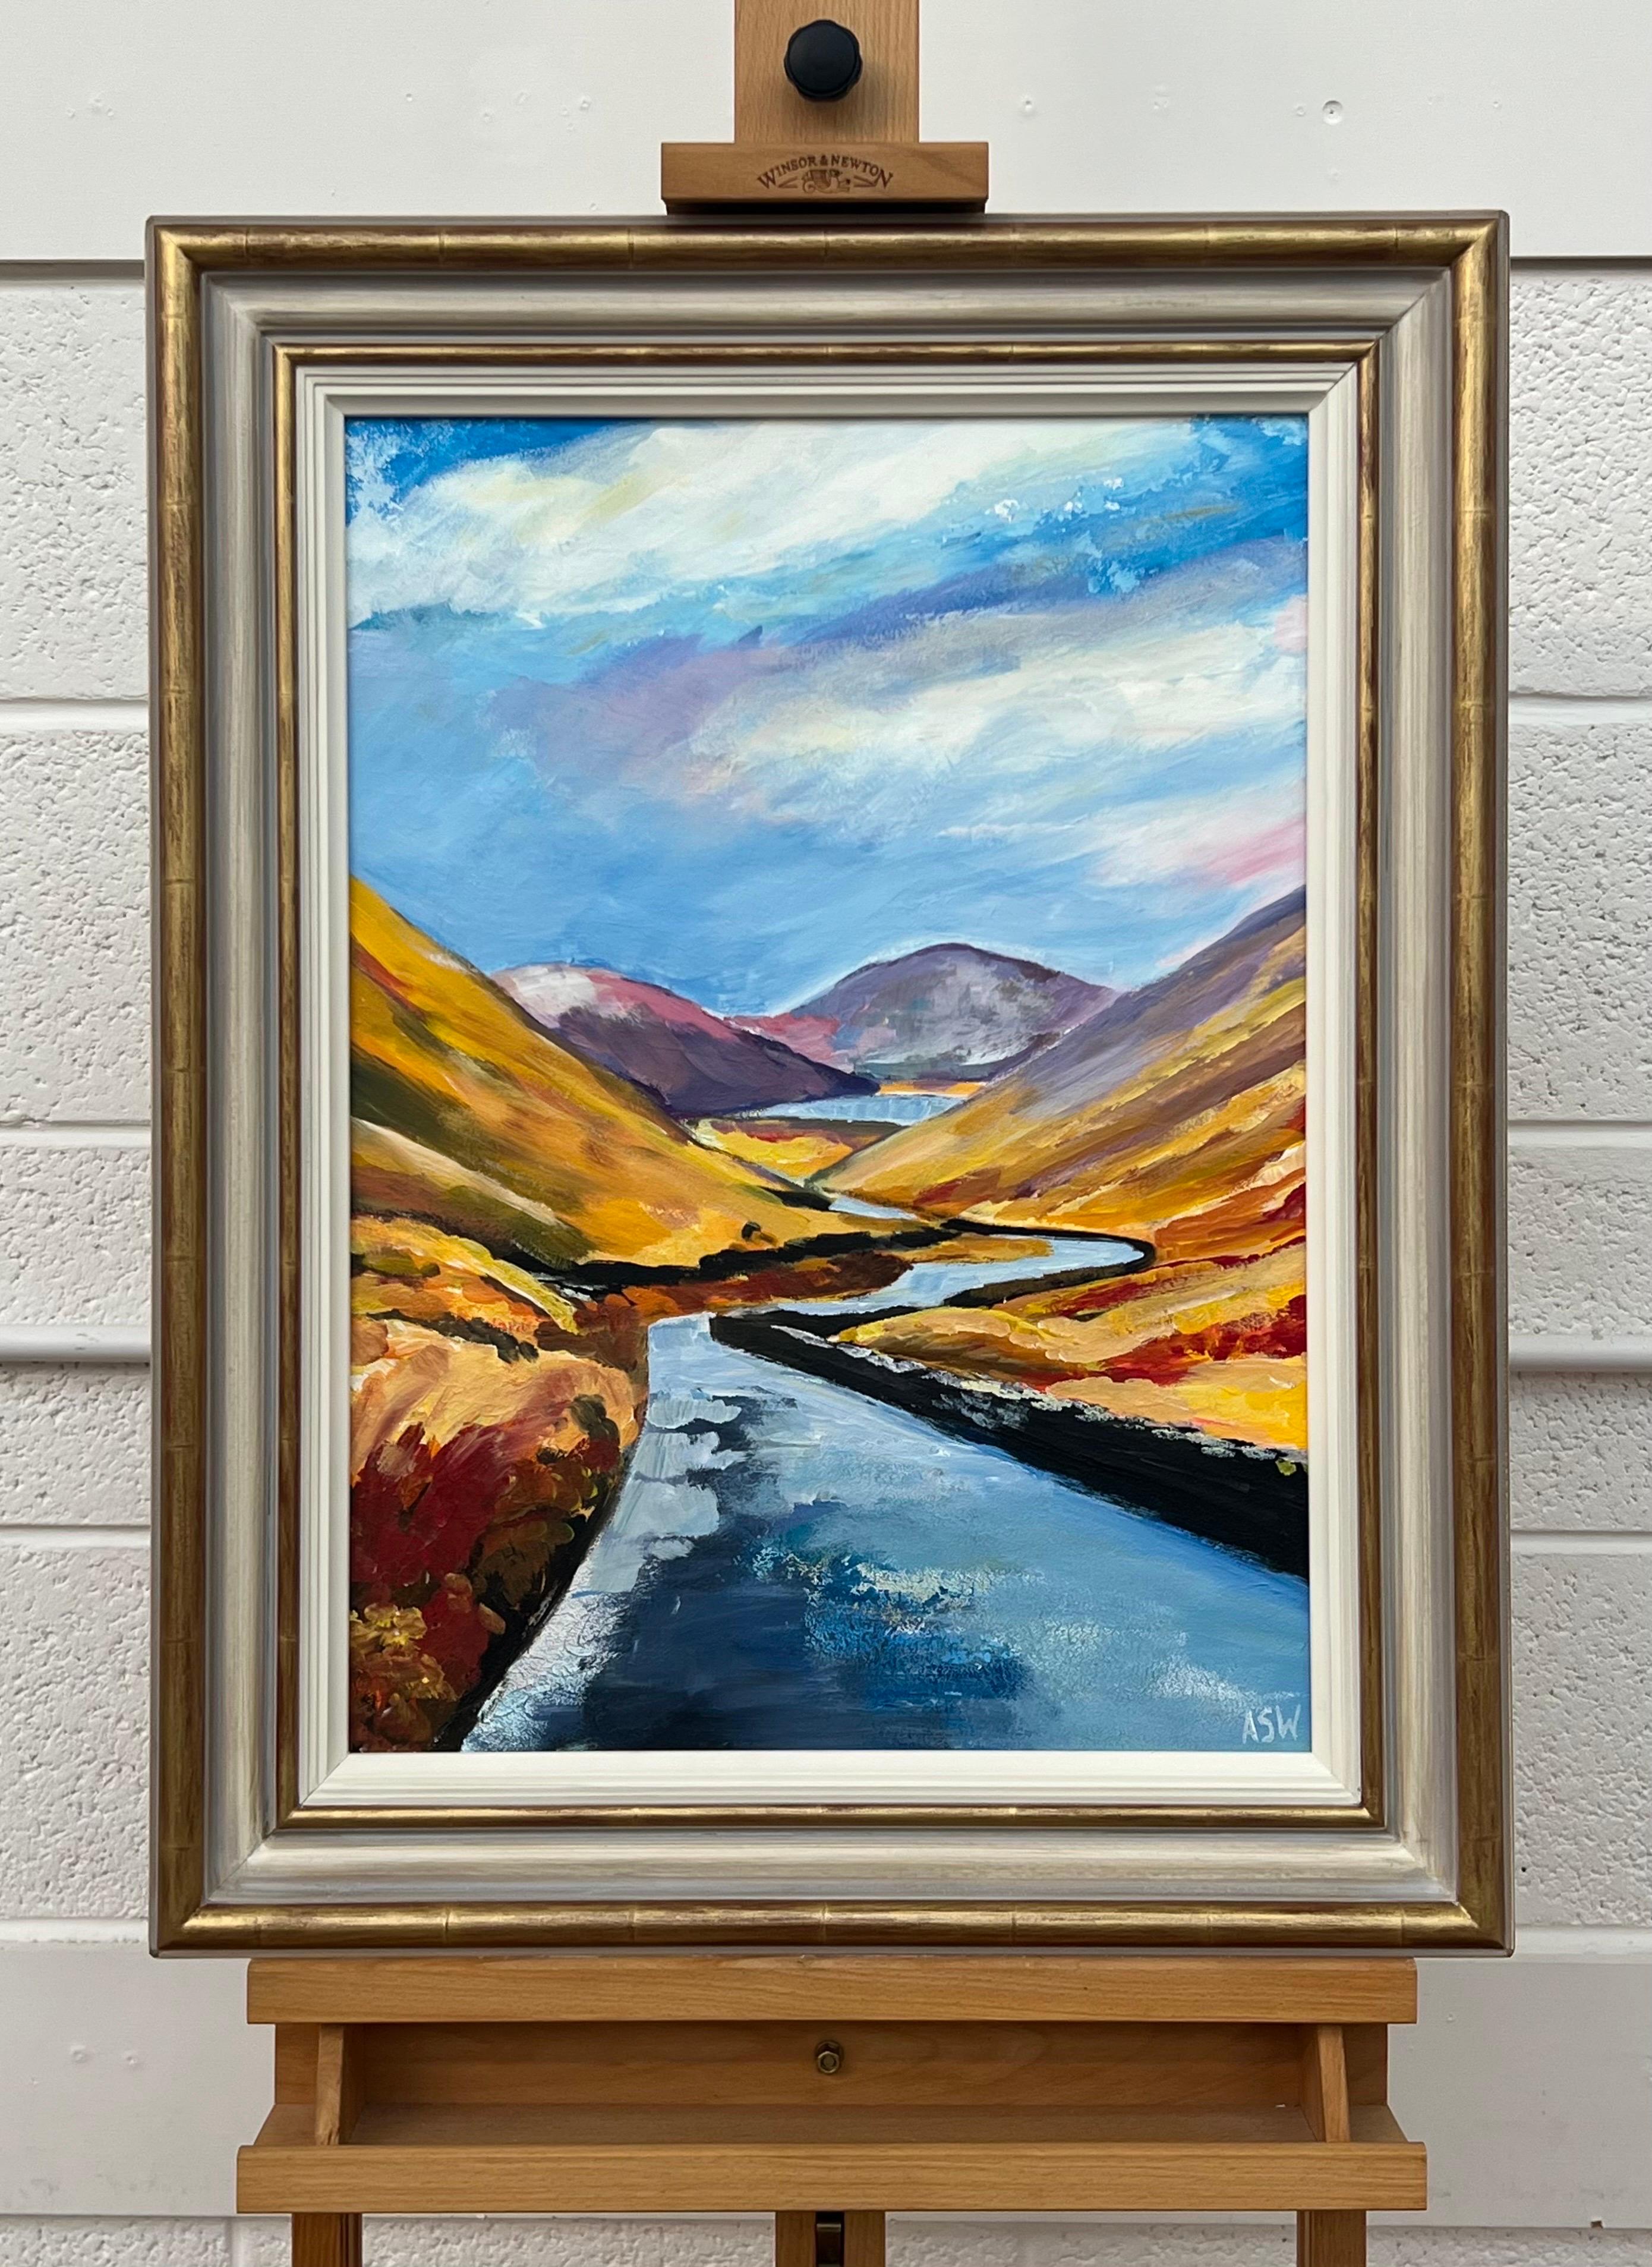 A Memory of Kirkstone Pass Mountain Landscape in the Lake District of England - Painting by Angela Wakefield